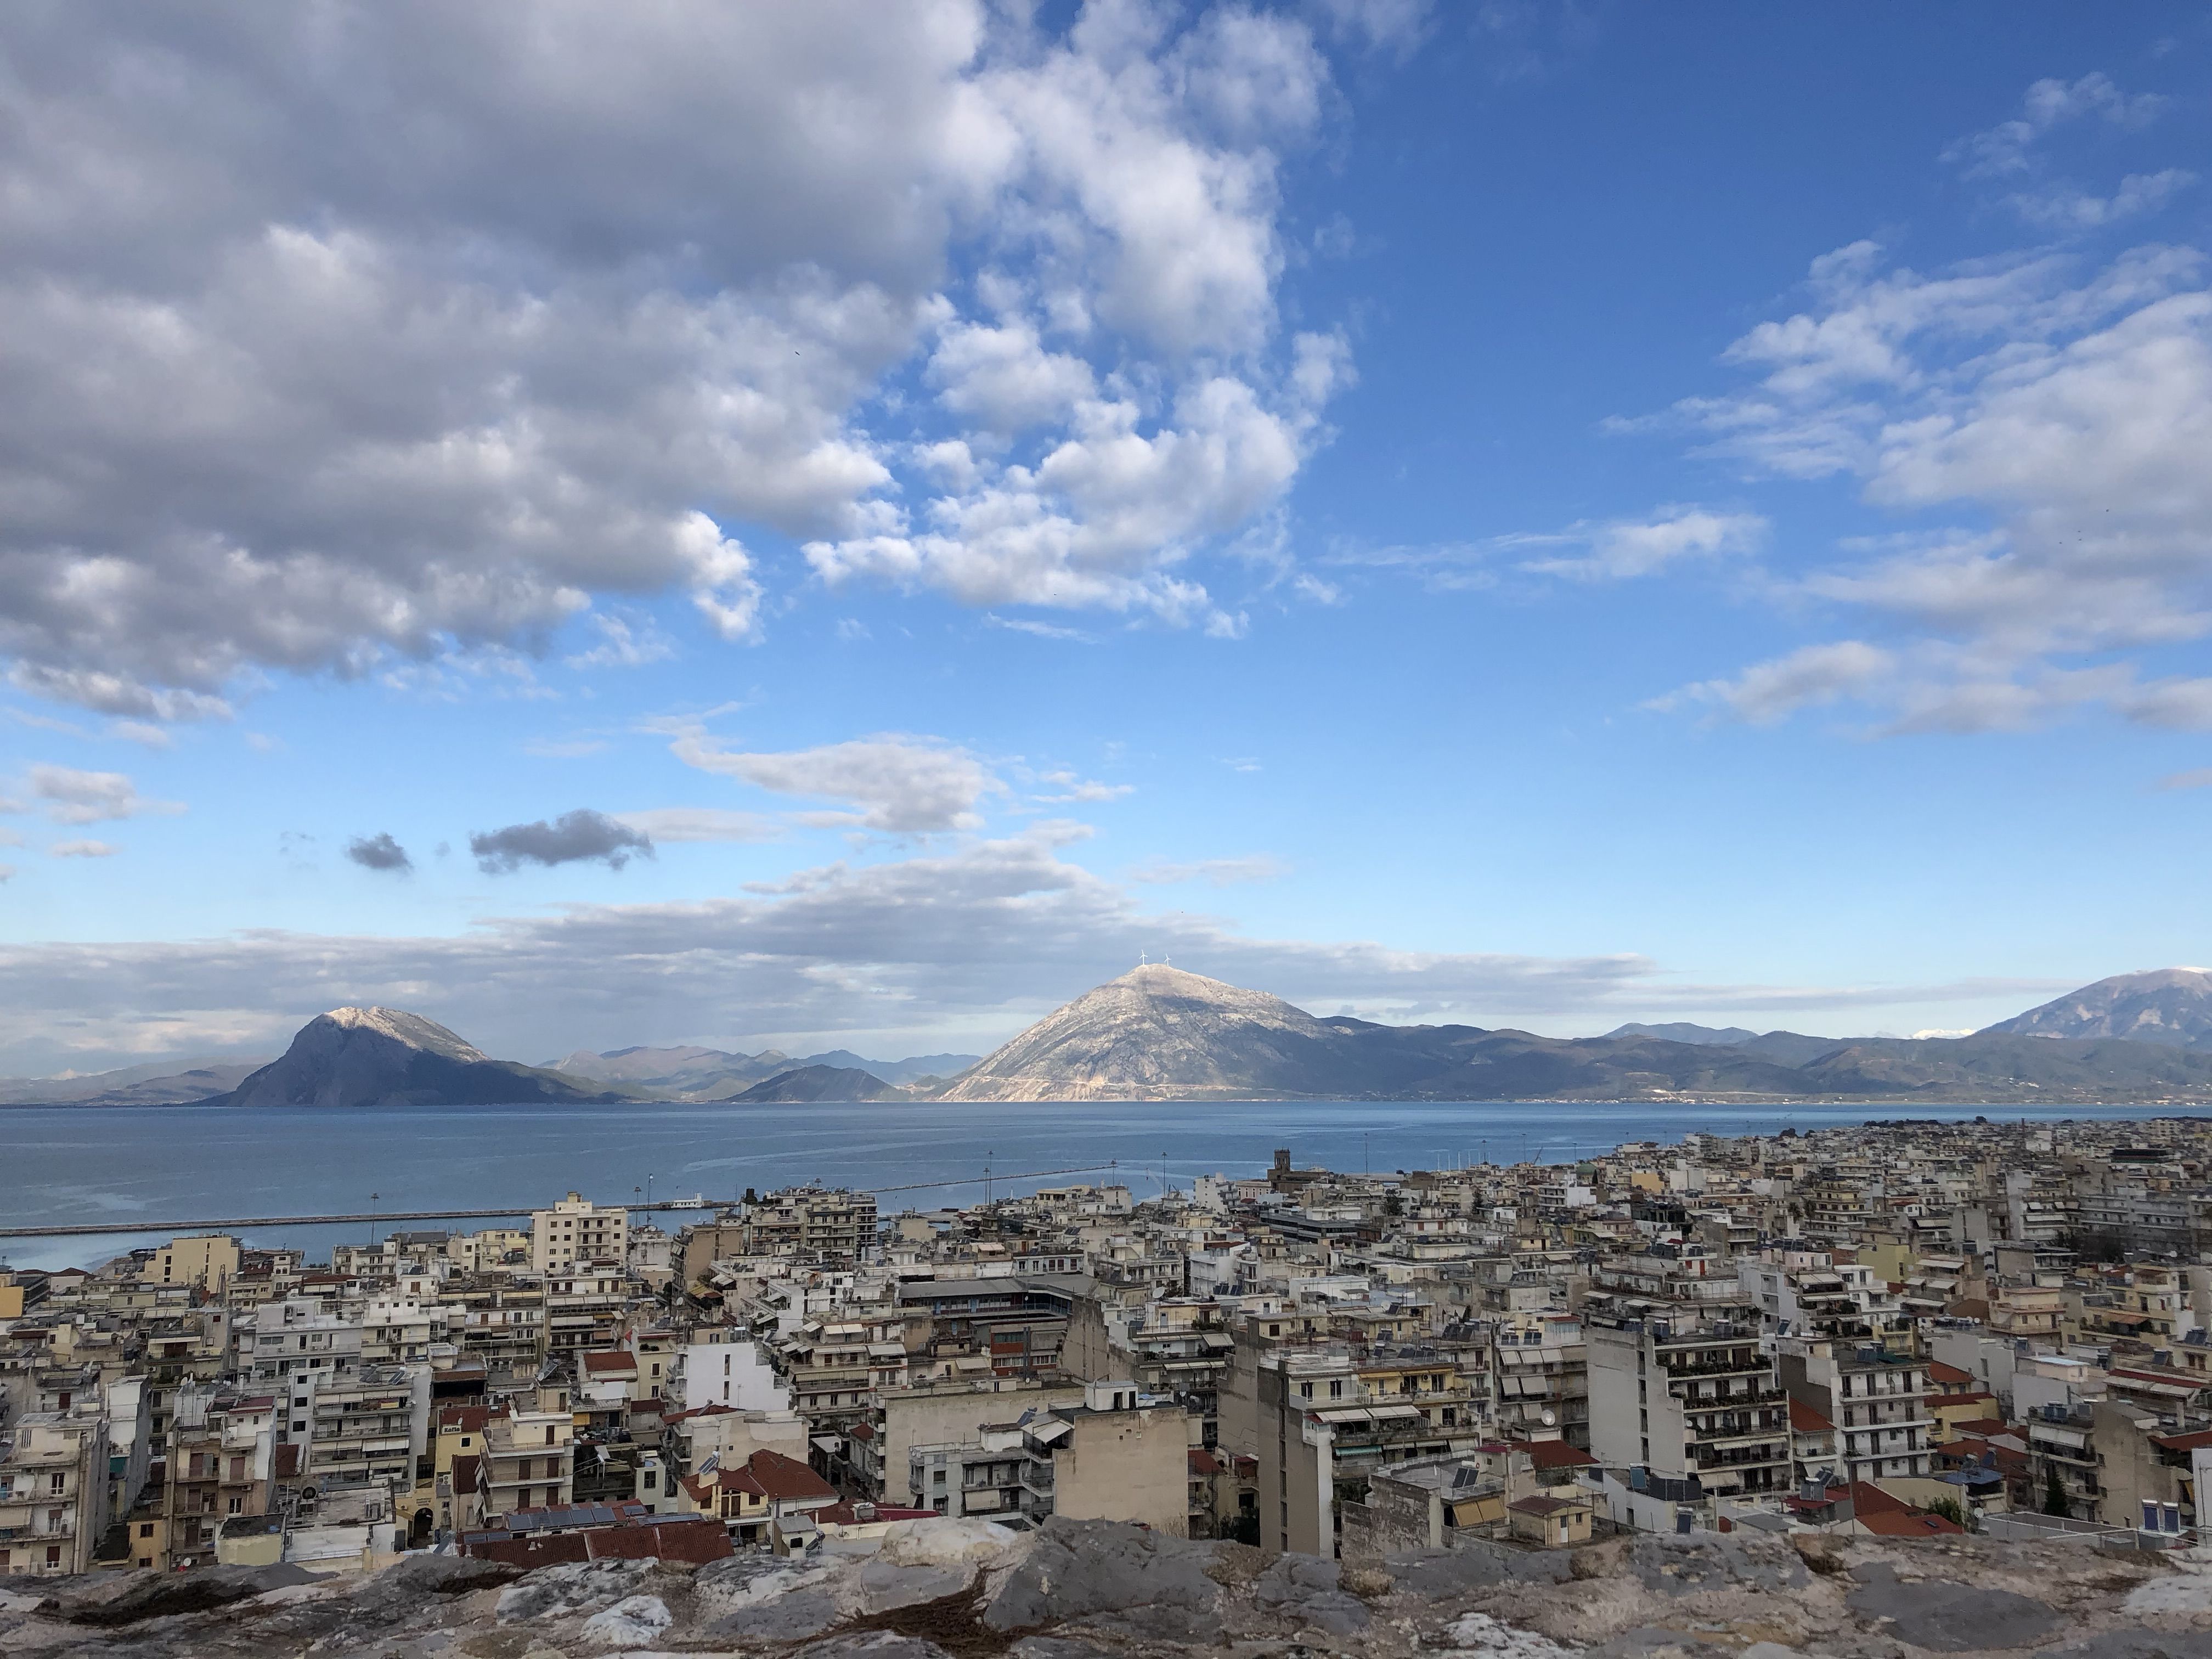 Looking out over Patras, in shadow. Across the water are lightly wooded mountains.